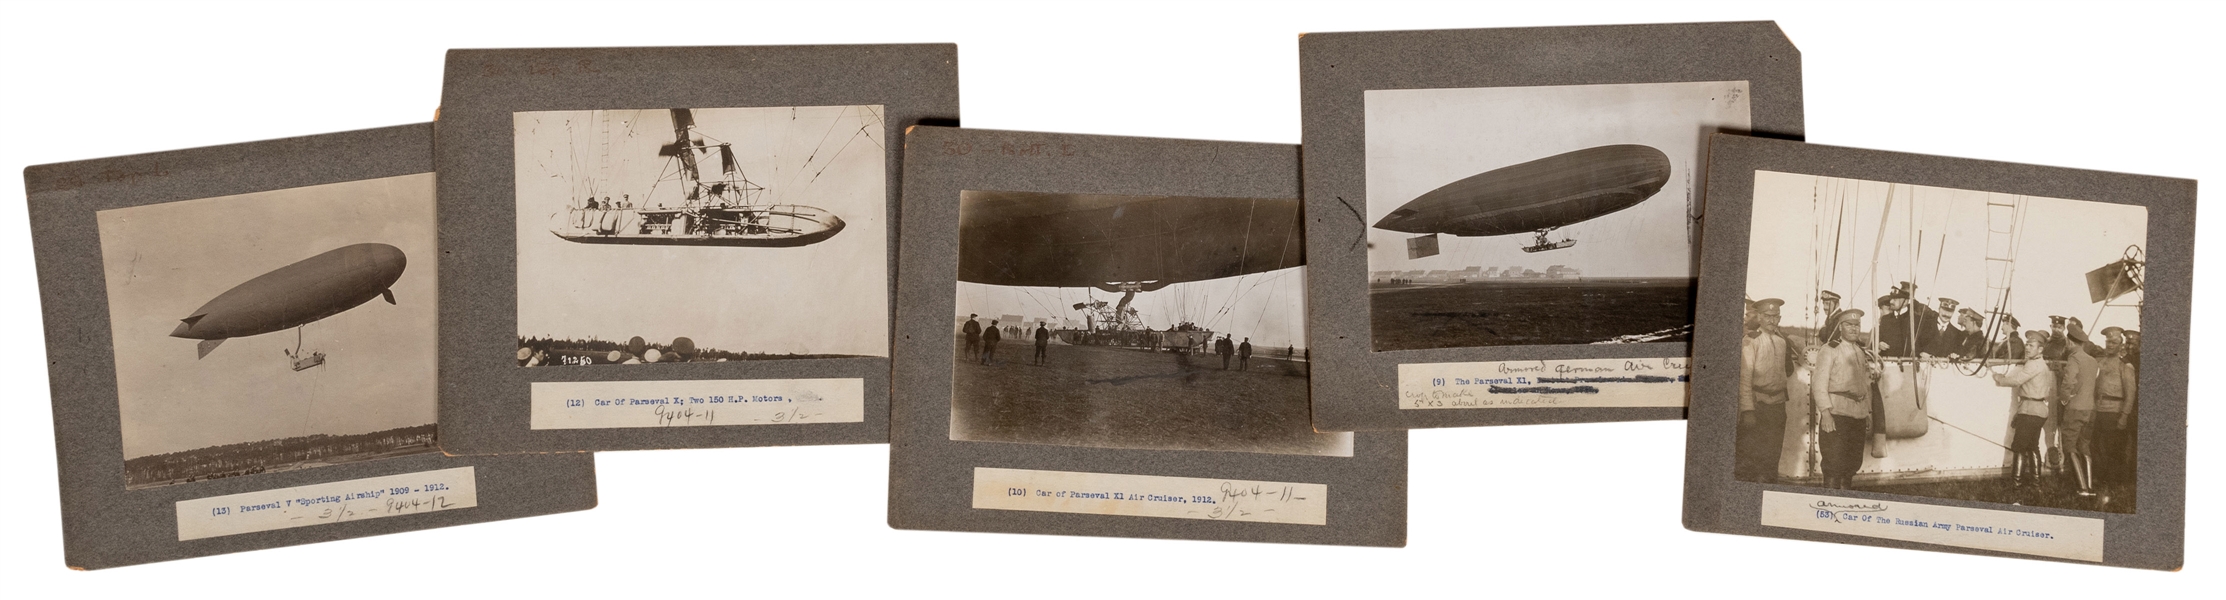  Russian Dirigibles Photo Archive. 1909-1912. 5 photographs ...